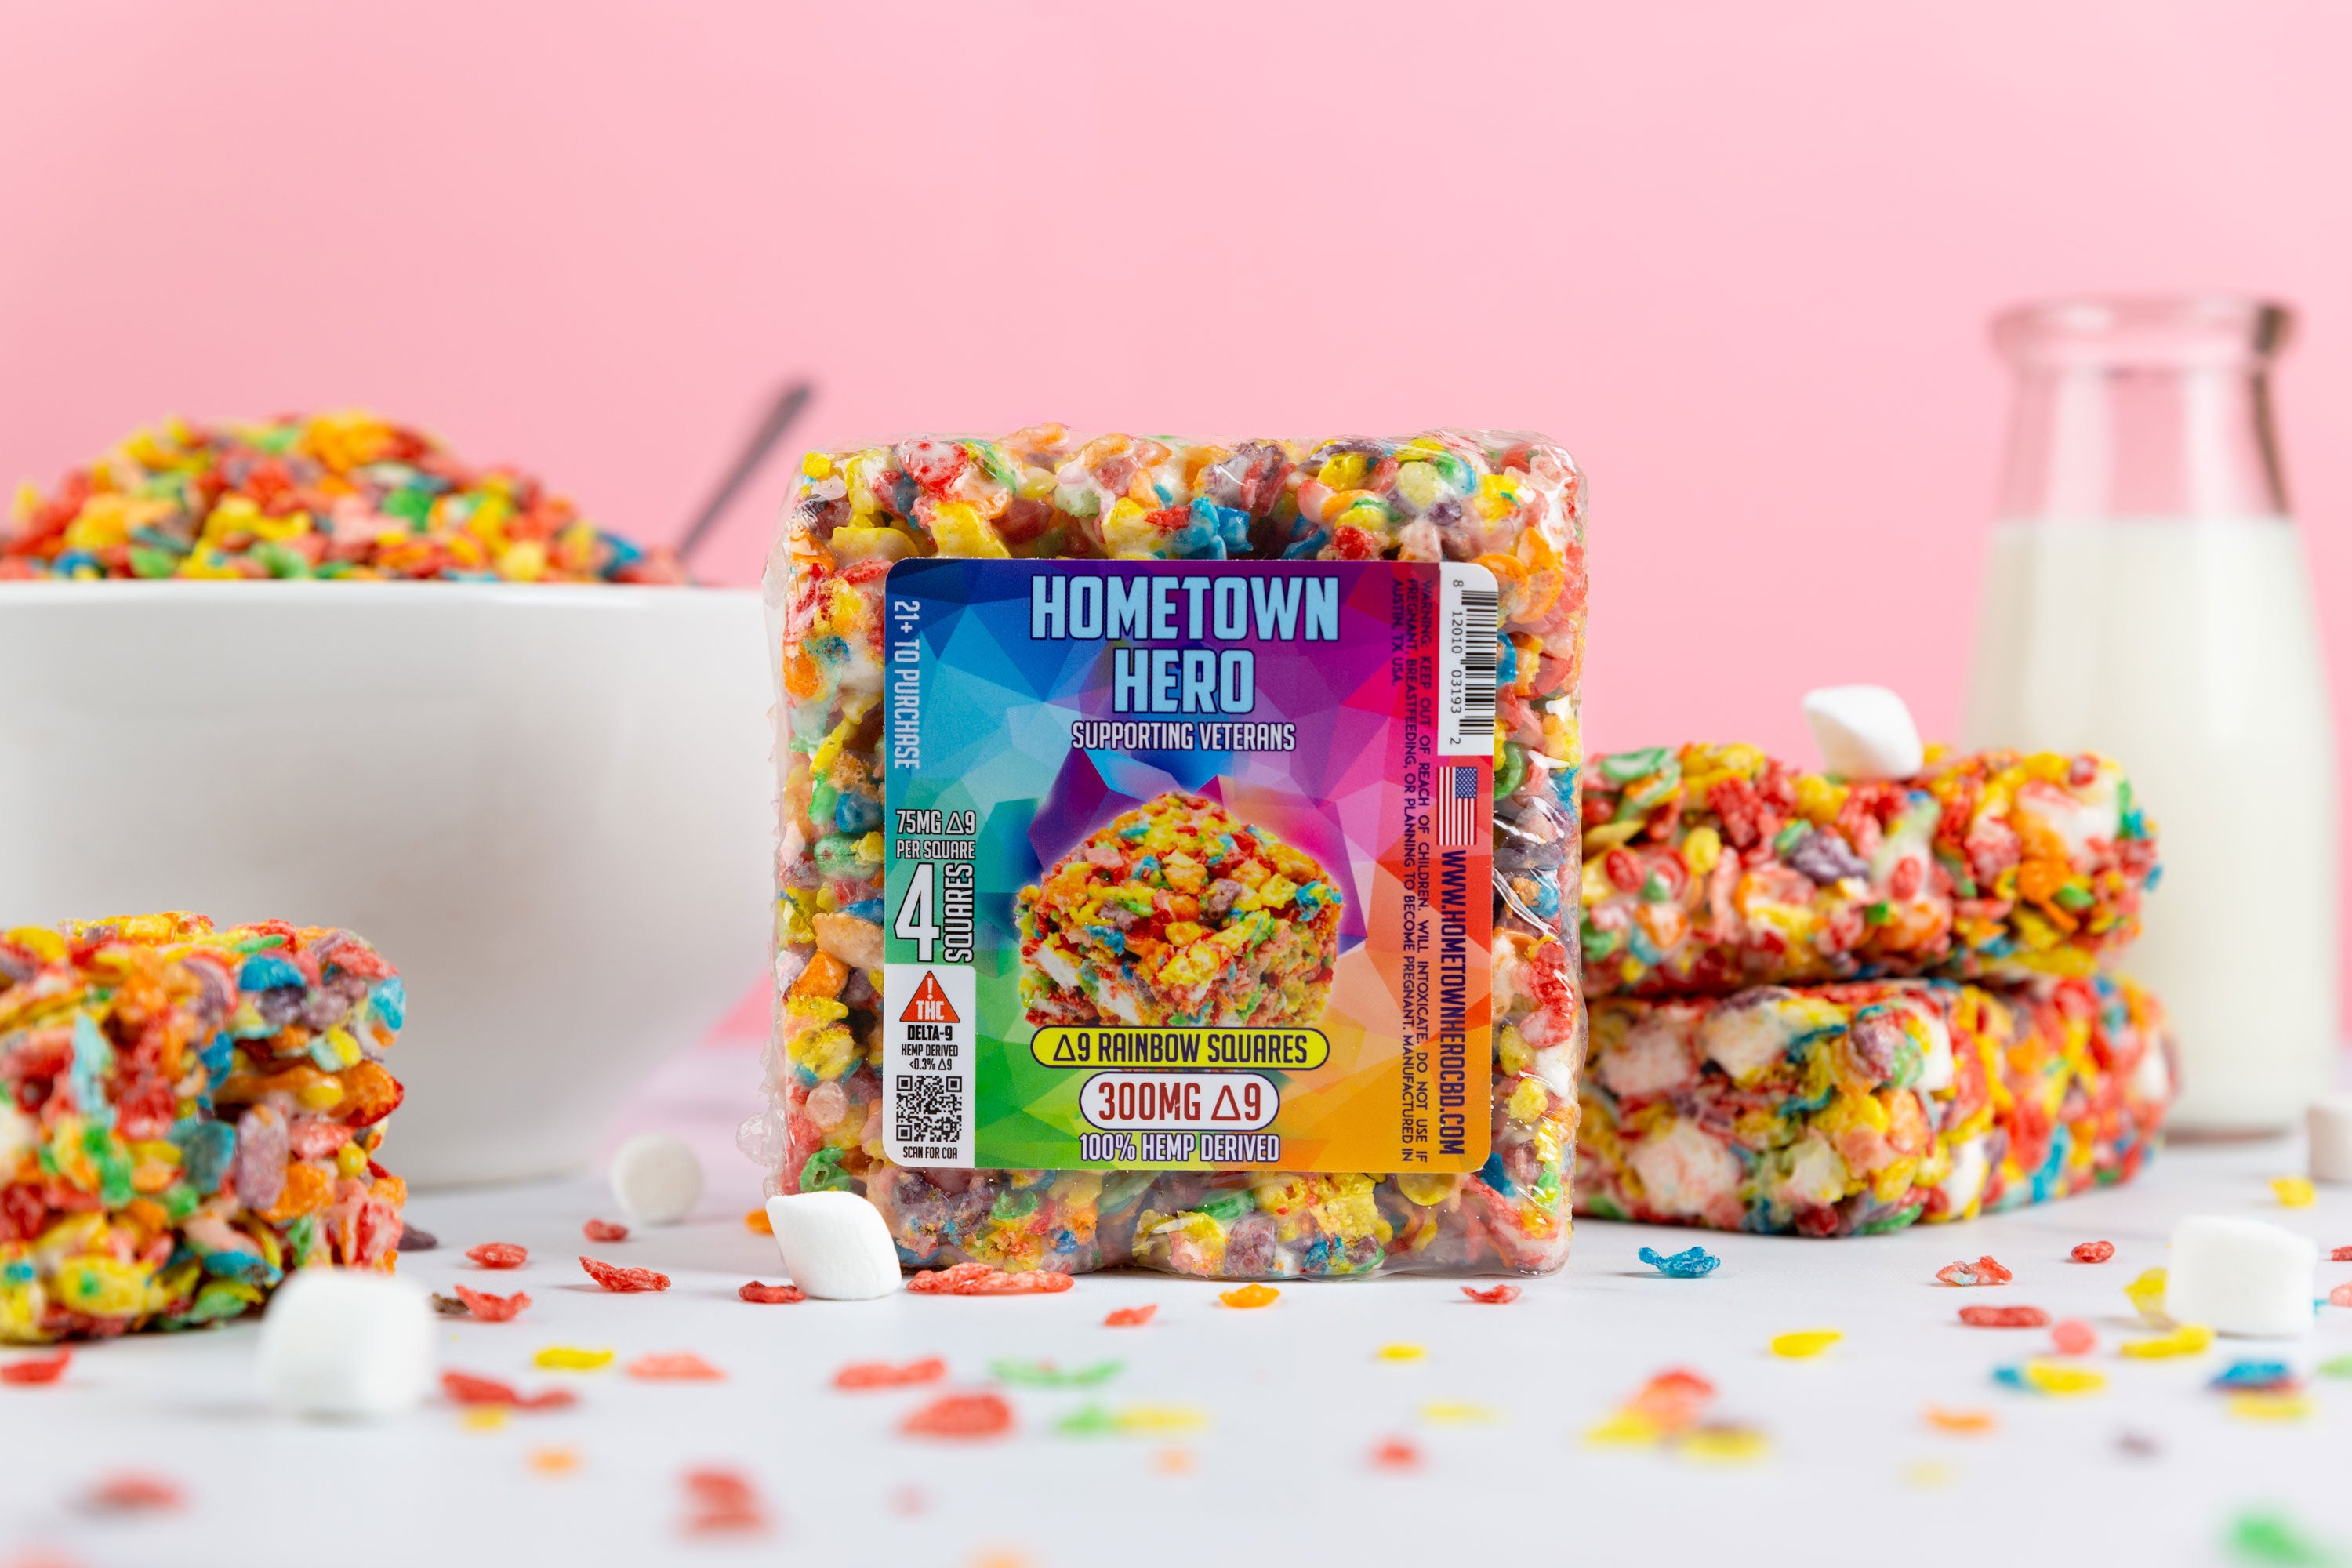 Buy 4 Get 1 FREE Delta-9 THC Rainbow Squares with glass of milk